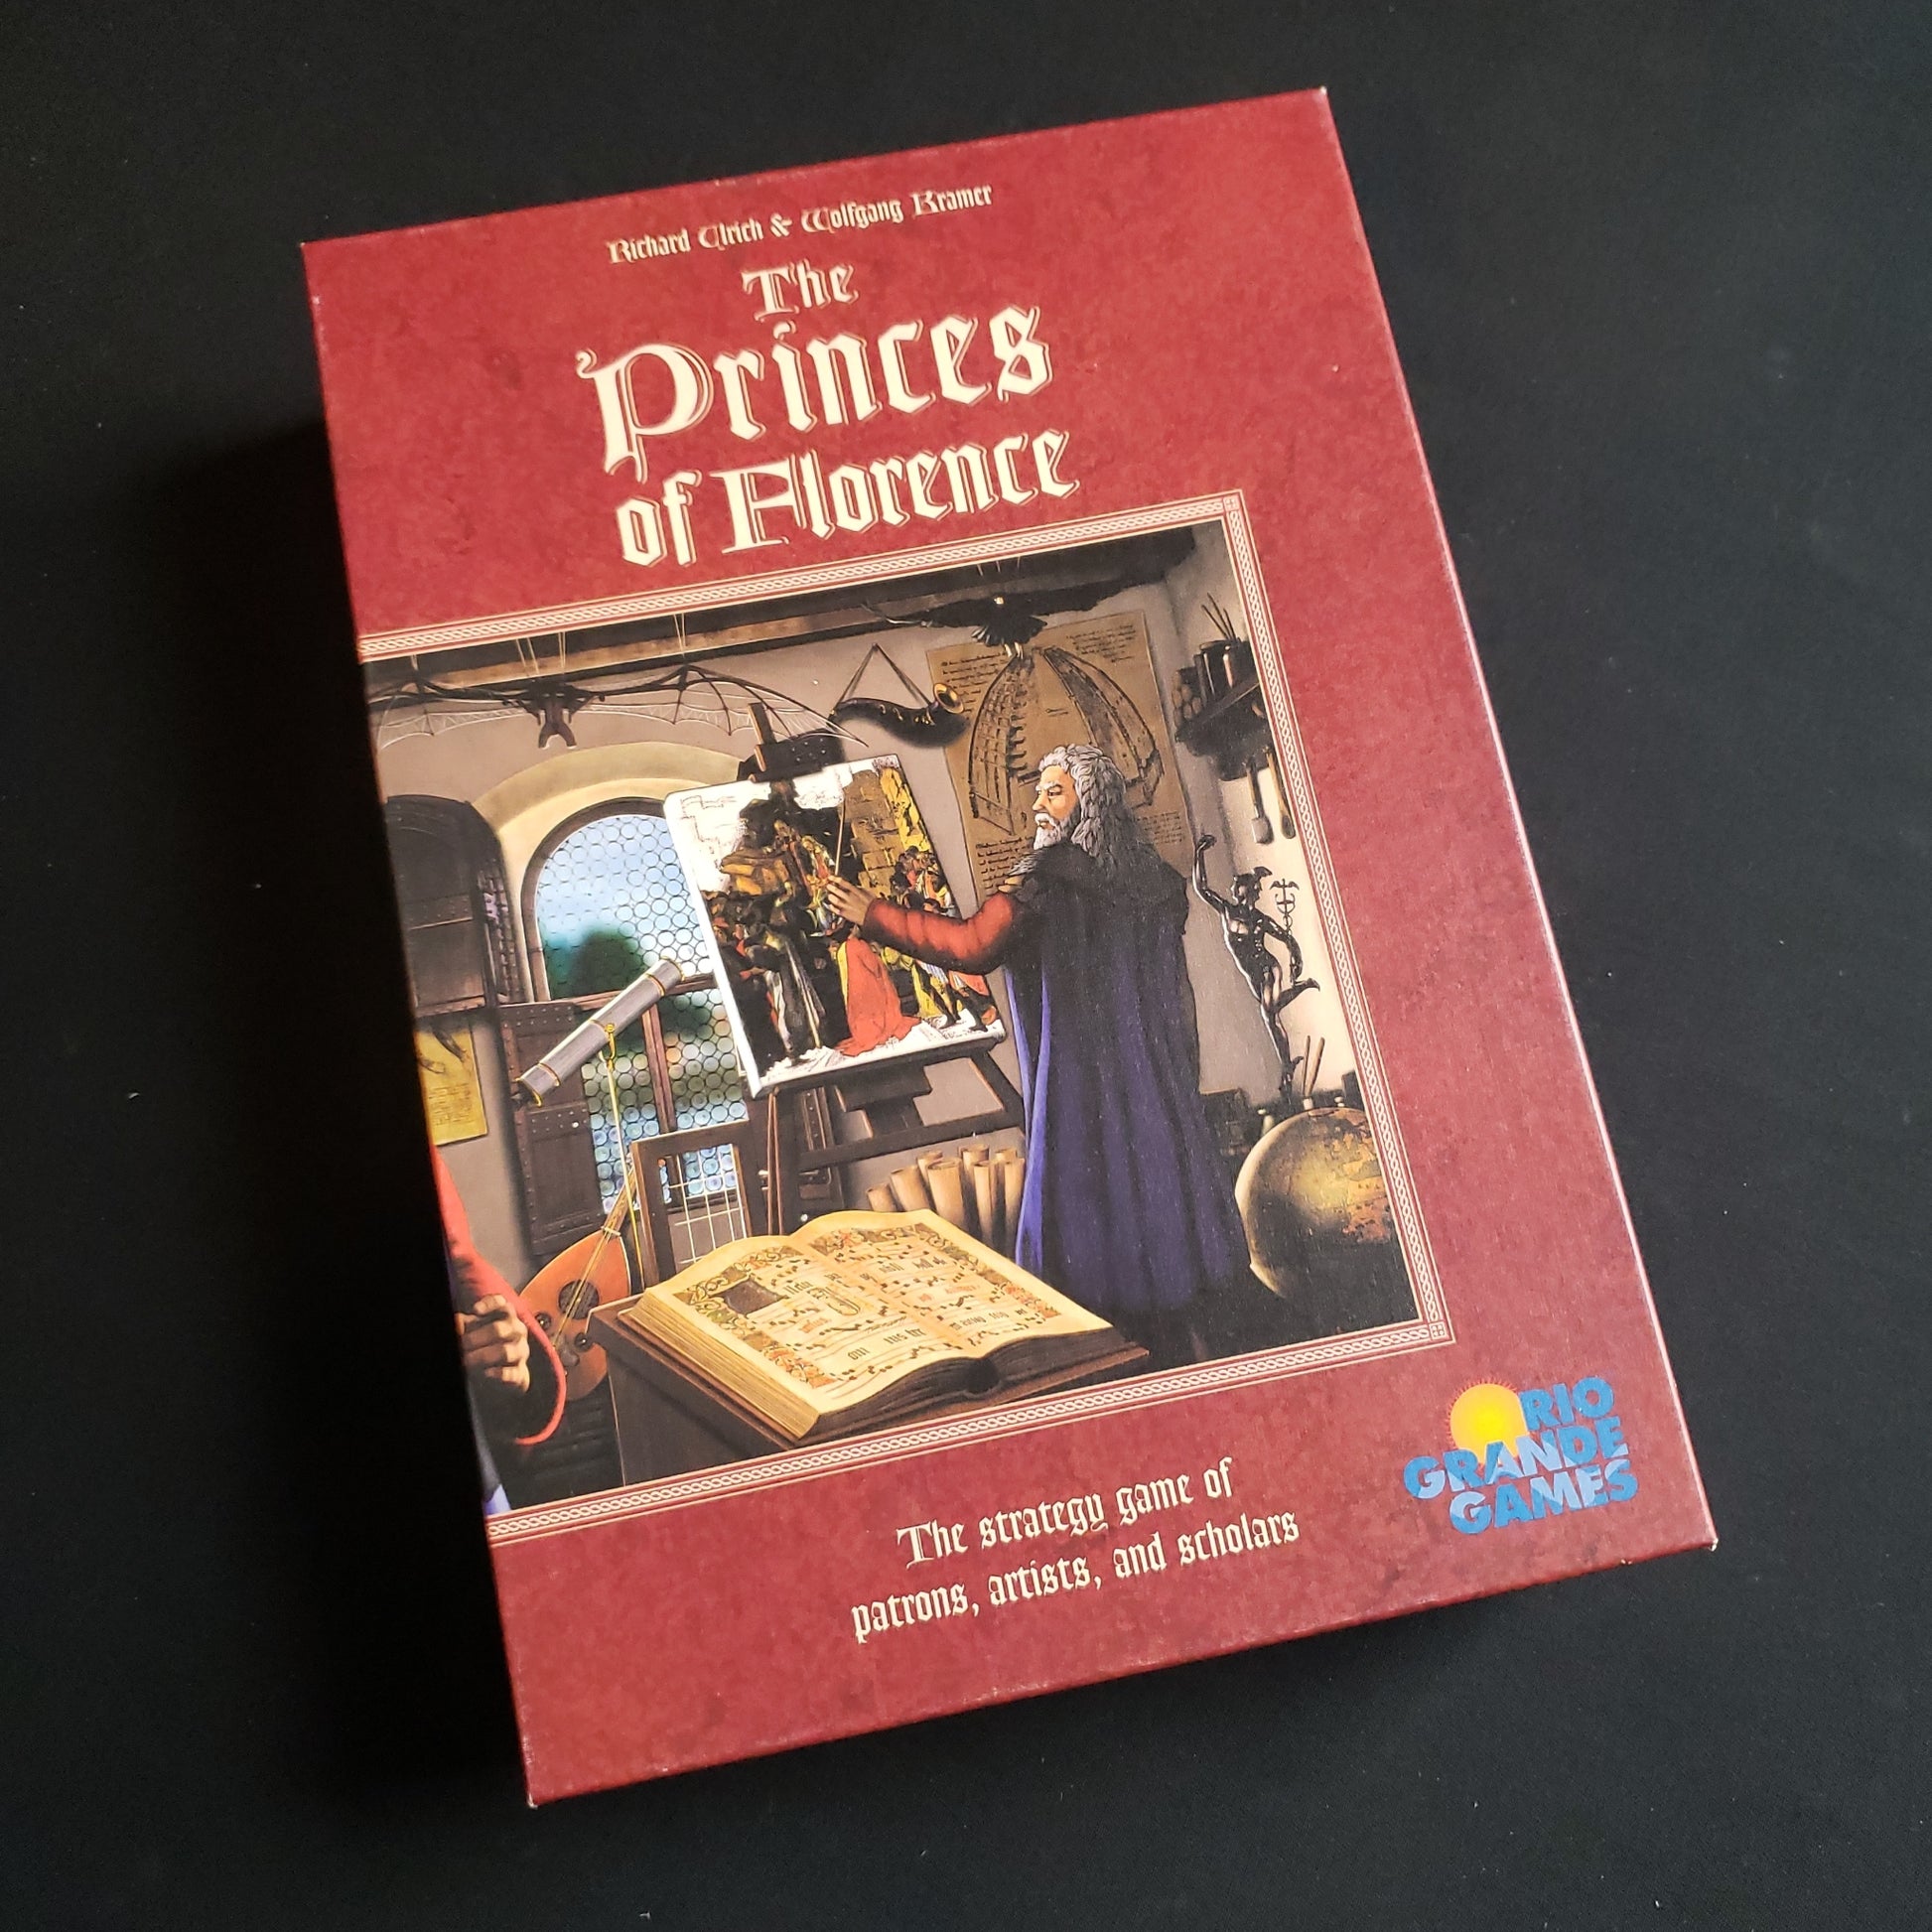 Image shows the front cover of the box of the Princes of Florence board game